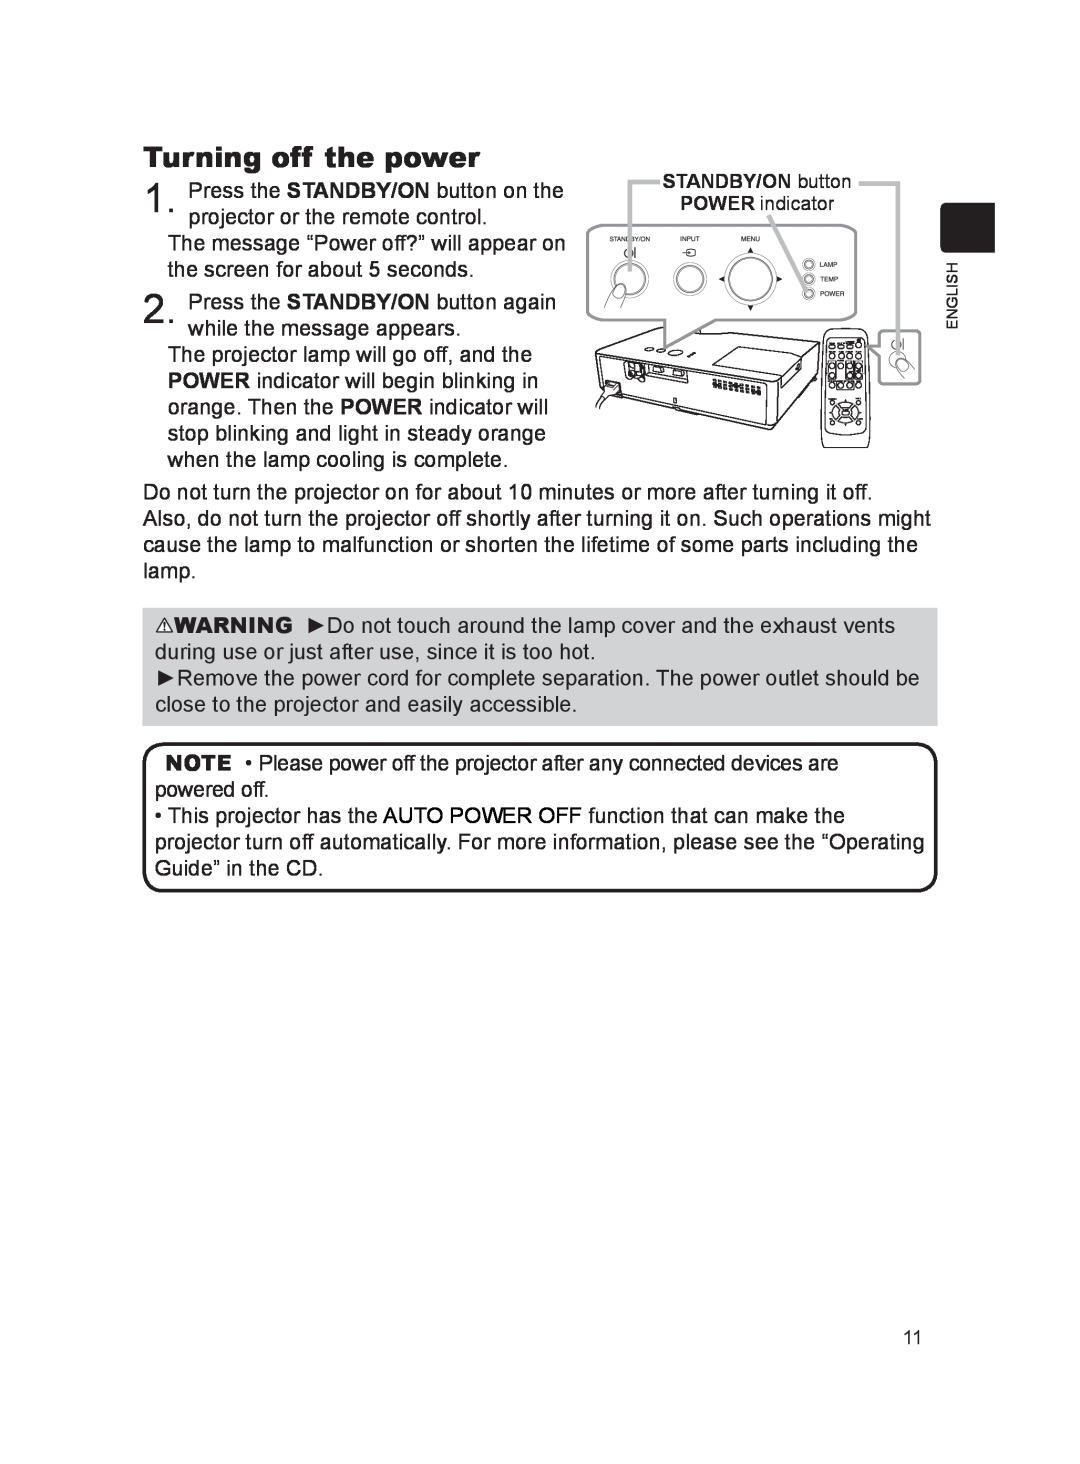 Dukane MODEL 8788 user manual Turning off the power 